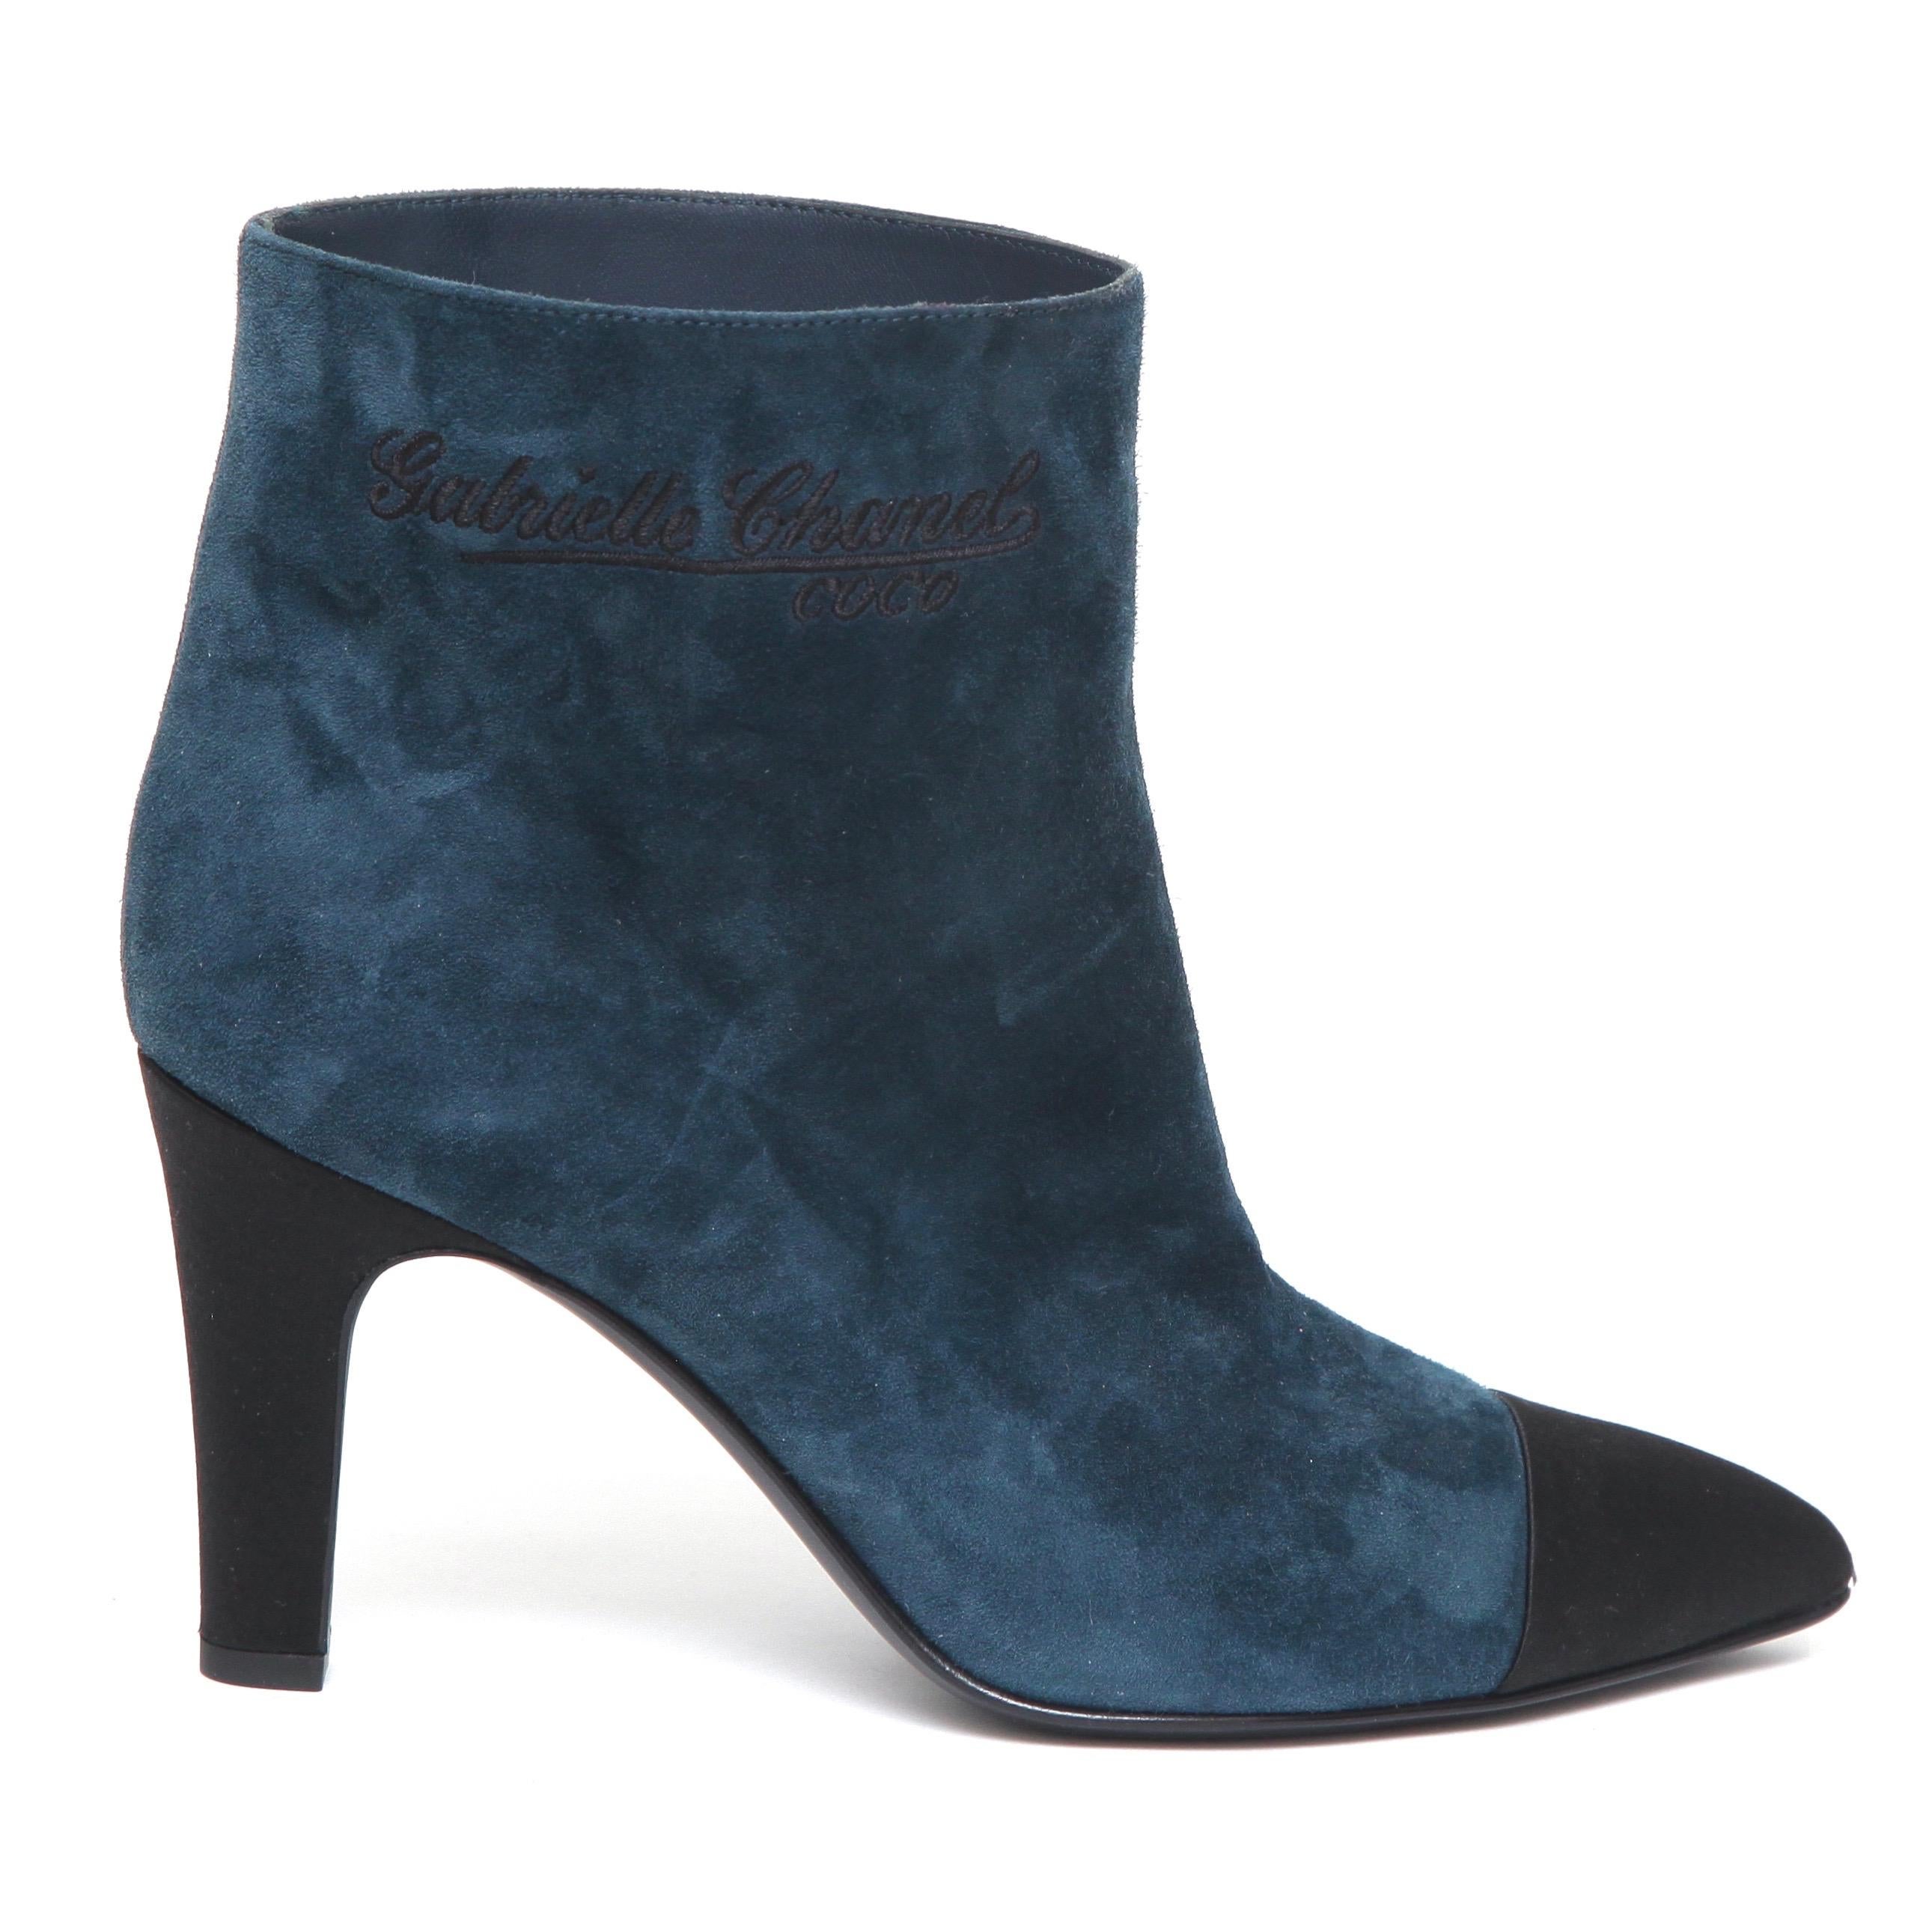 GUARANTEED AUTHENTIC CHANEL 2017 BLUE SUEDE GABRIELLE COCO ANKLE BOOTS

Details:
- Blue suede uppers.
- Pointed black grosgrain cap toe.
- Black grosgrain heels.
- Leather insole and soles.
- Comes with dust bag.

Size: 38

Measurements